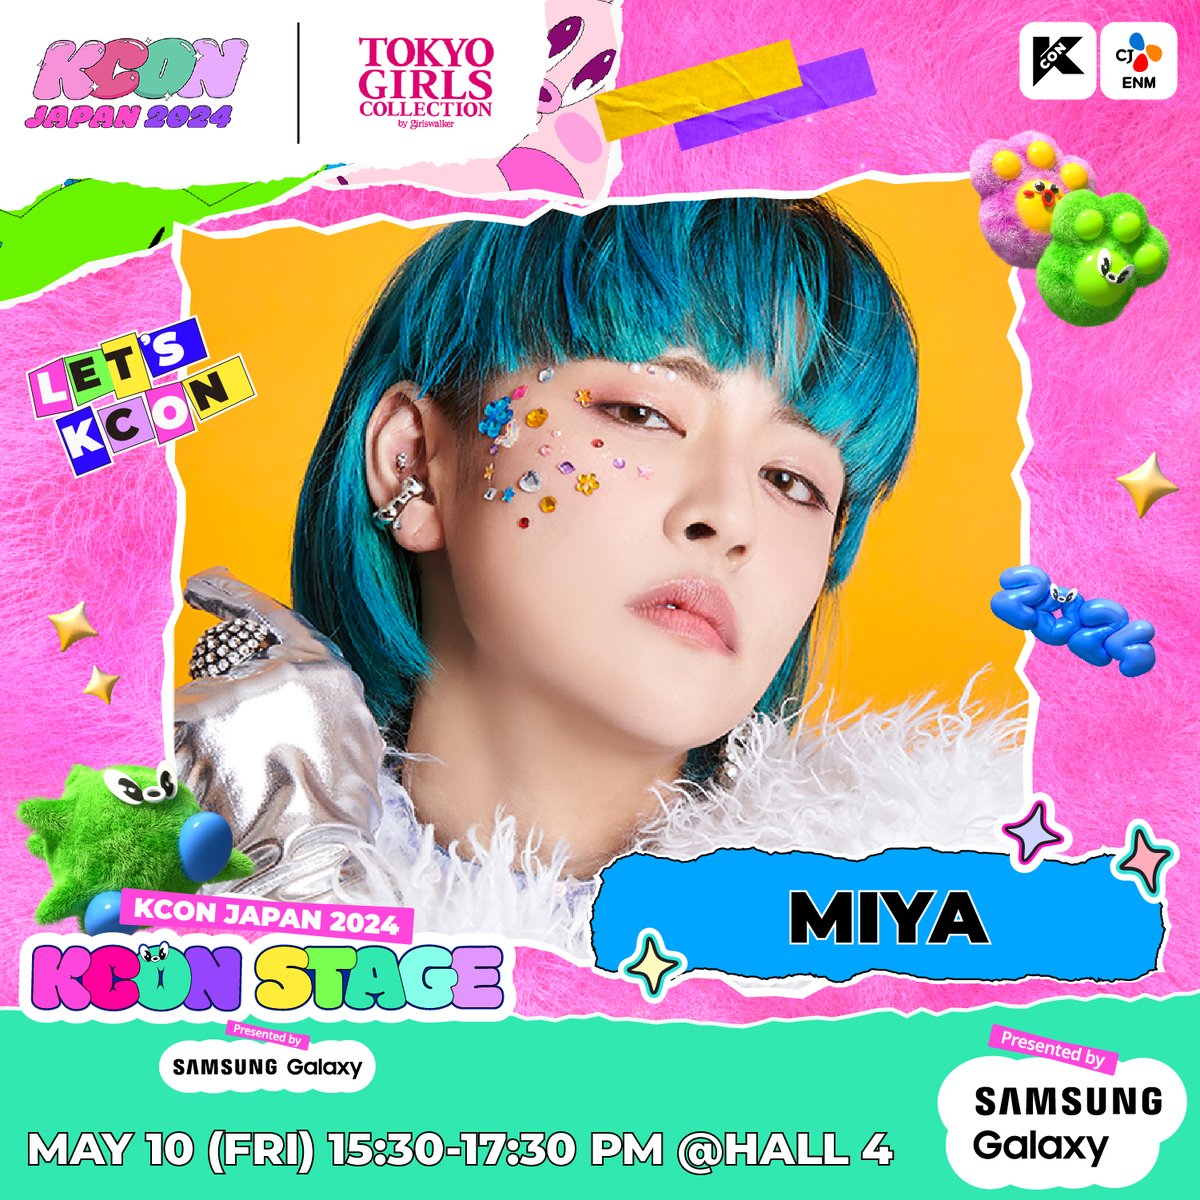 [#KCONJAPAN2024] TOKYO GIRLS COLLECTION LINEUP 📍 MAY 10 (FRI) 15:30 ~ 17:30PM 📍 KCON STAGE HALL 4 💙GUEST #Celest1a / @Celest1a_x #LEEMINHYUK / @L_M_H_smile 💙MC #MASHIHO / @mashiho_ib #MIYA / @miya38_official 📢GET YOUR TICKET NOW 🎫 bit.ly/3vrYG1I